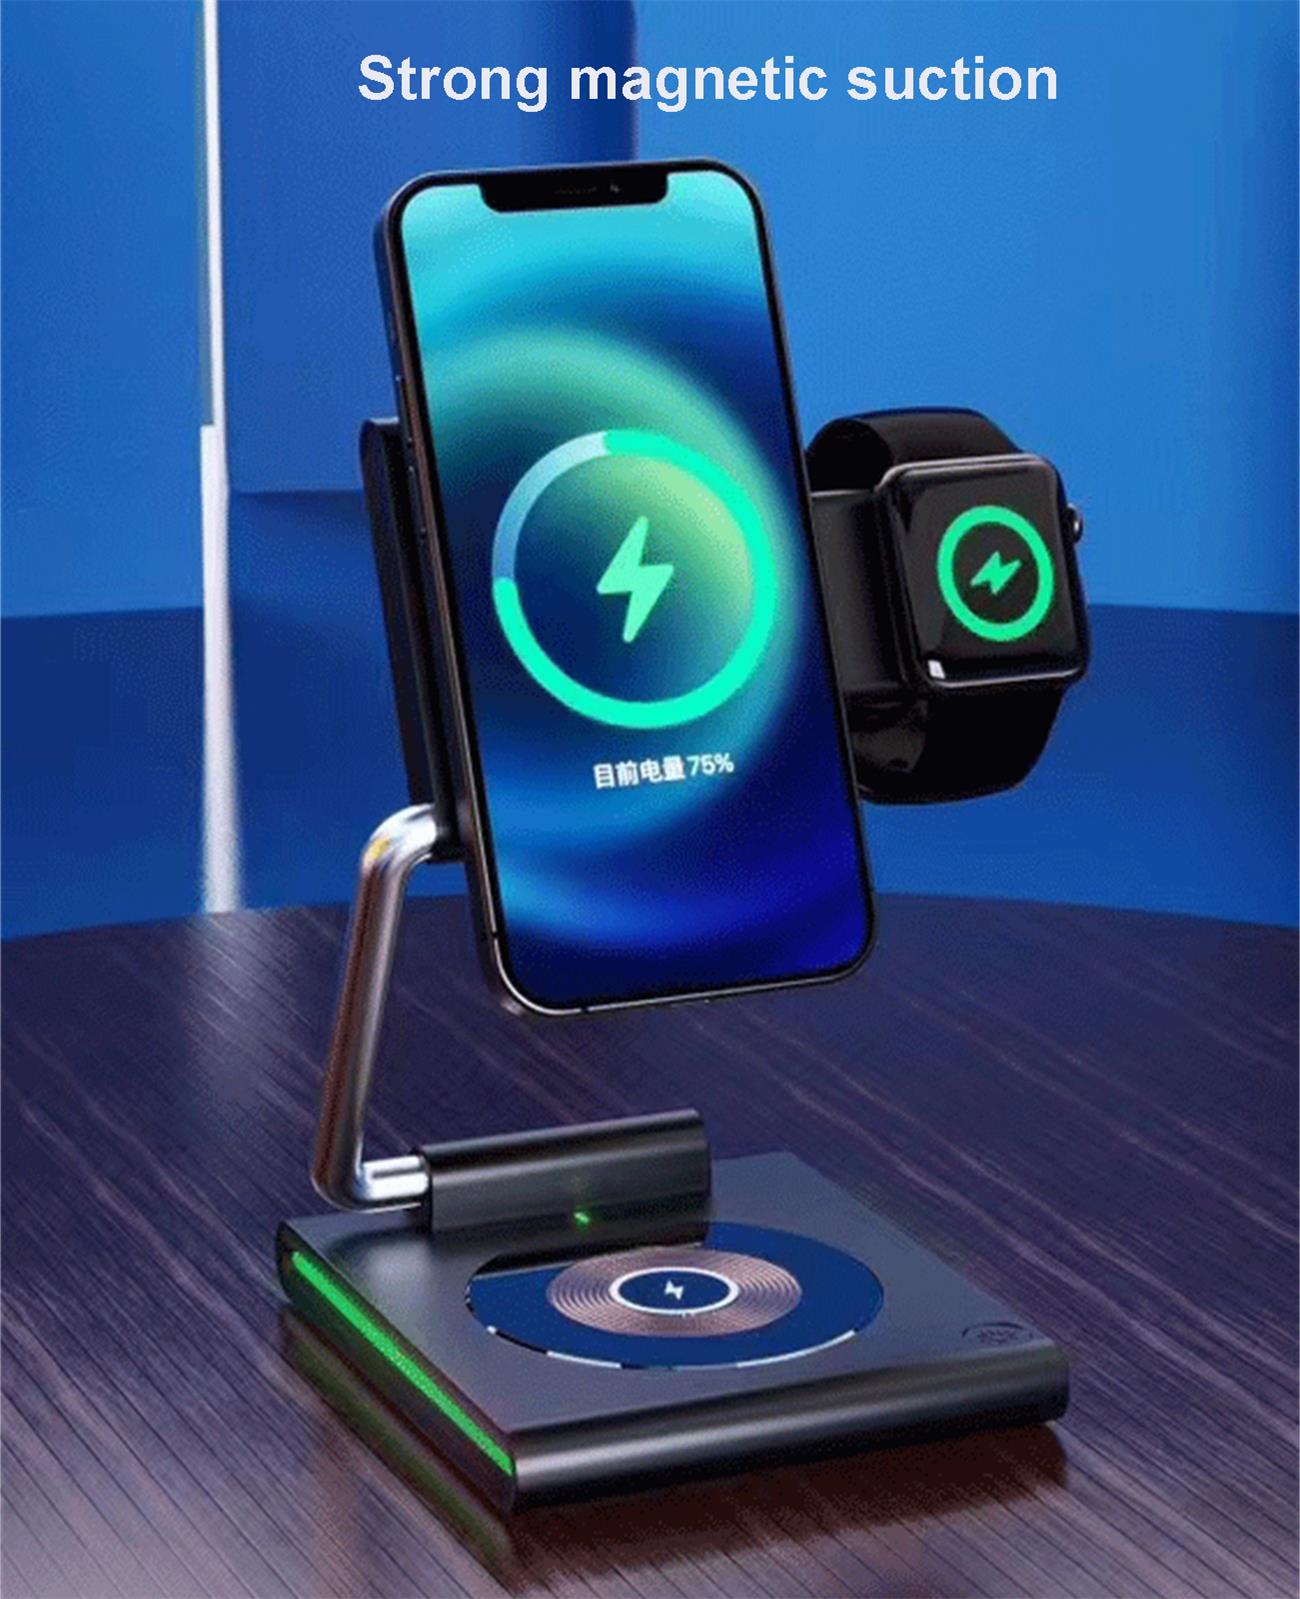 Magnetic Wireless Charger Foldable 3 In 1 Multifunction For Apple And Samsung Phone Apple Watch Airpod